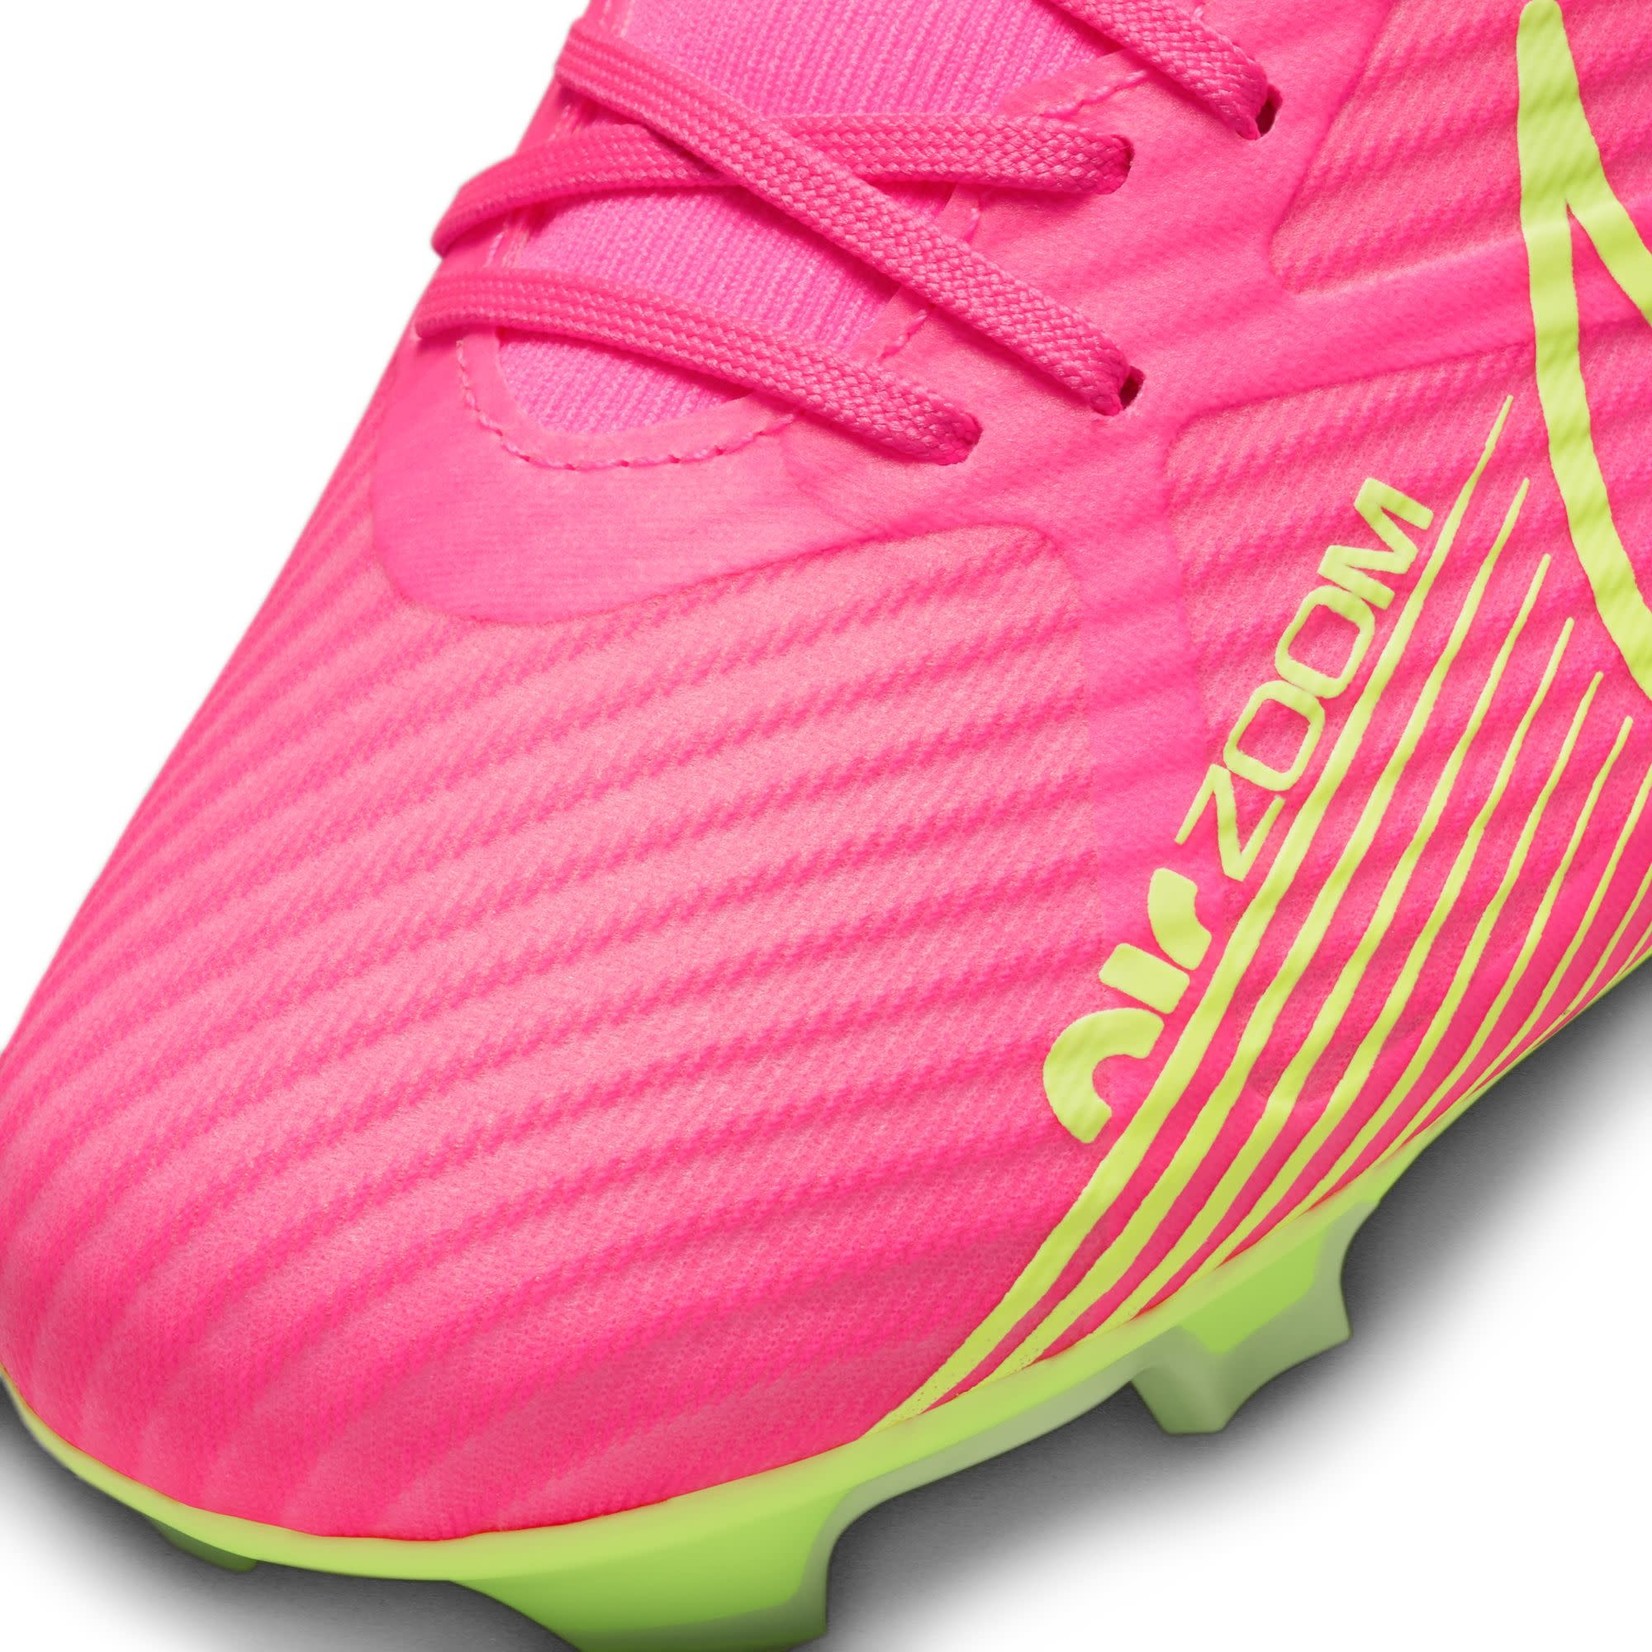 NIKE ZOOM MERCURIAL SUPERFLY 9 ACADEMY FG/MG (PINK/YELLOW)